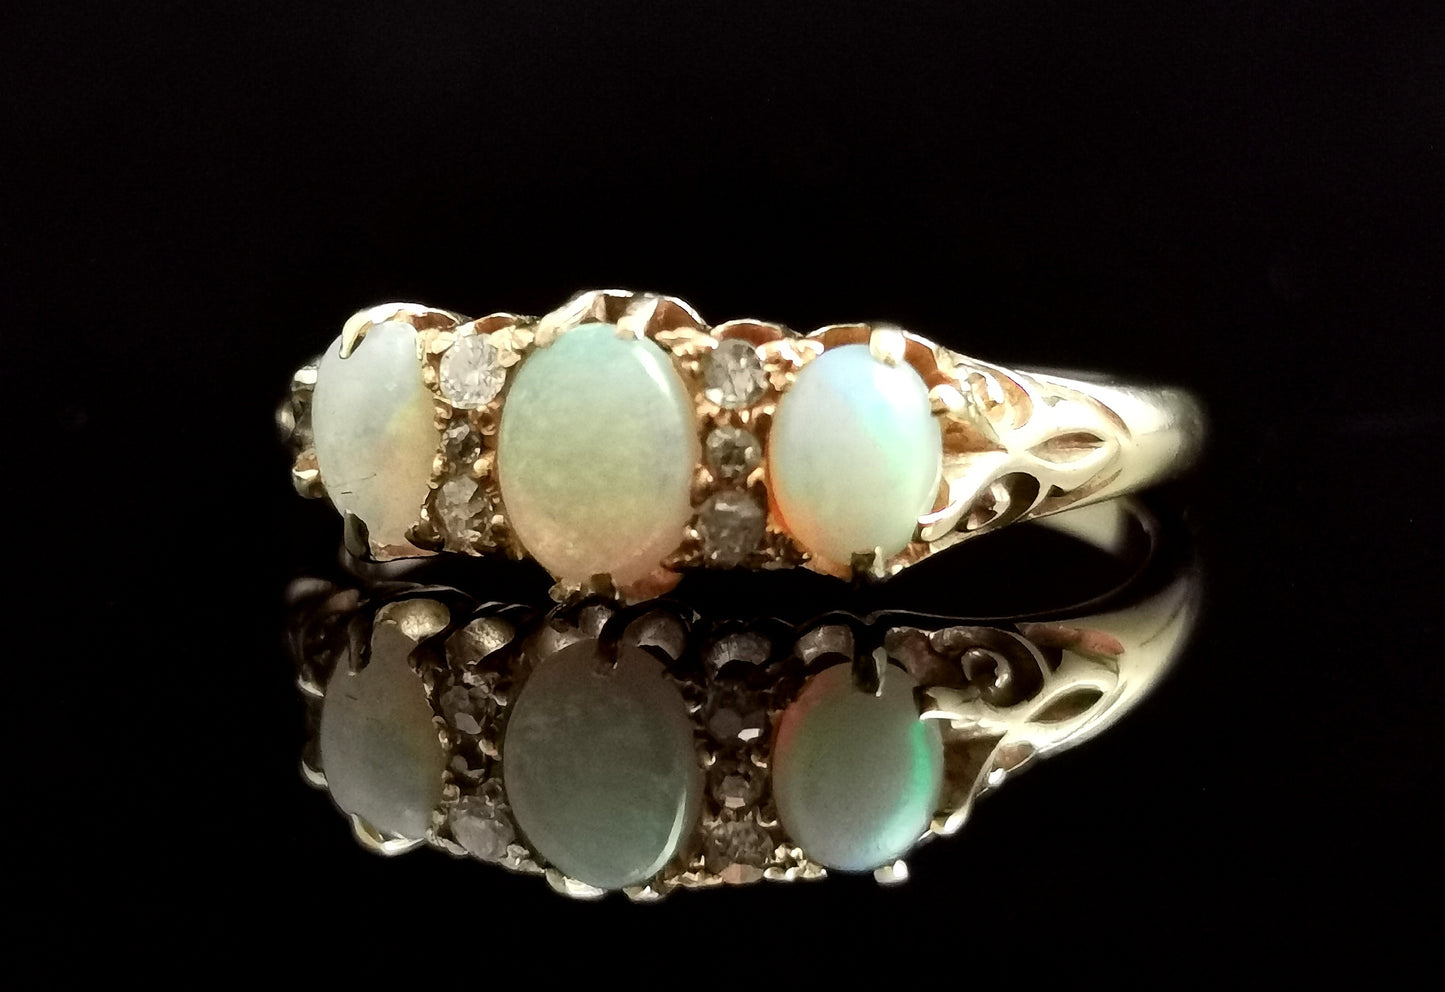 Antique Opal and diamond ring, 18ct gold, Edwardian